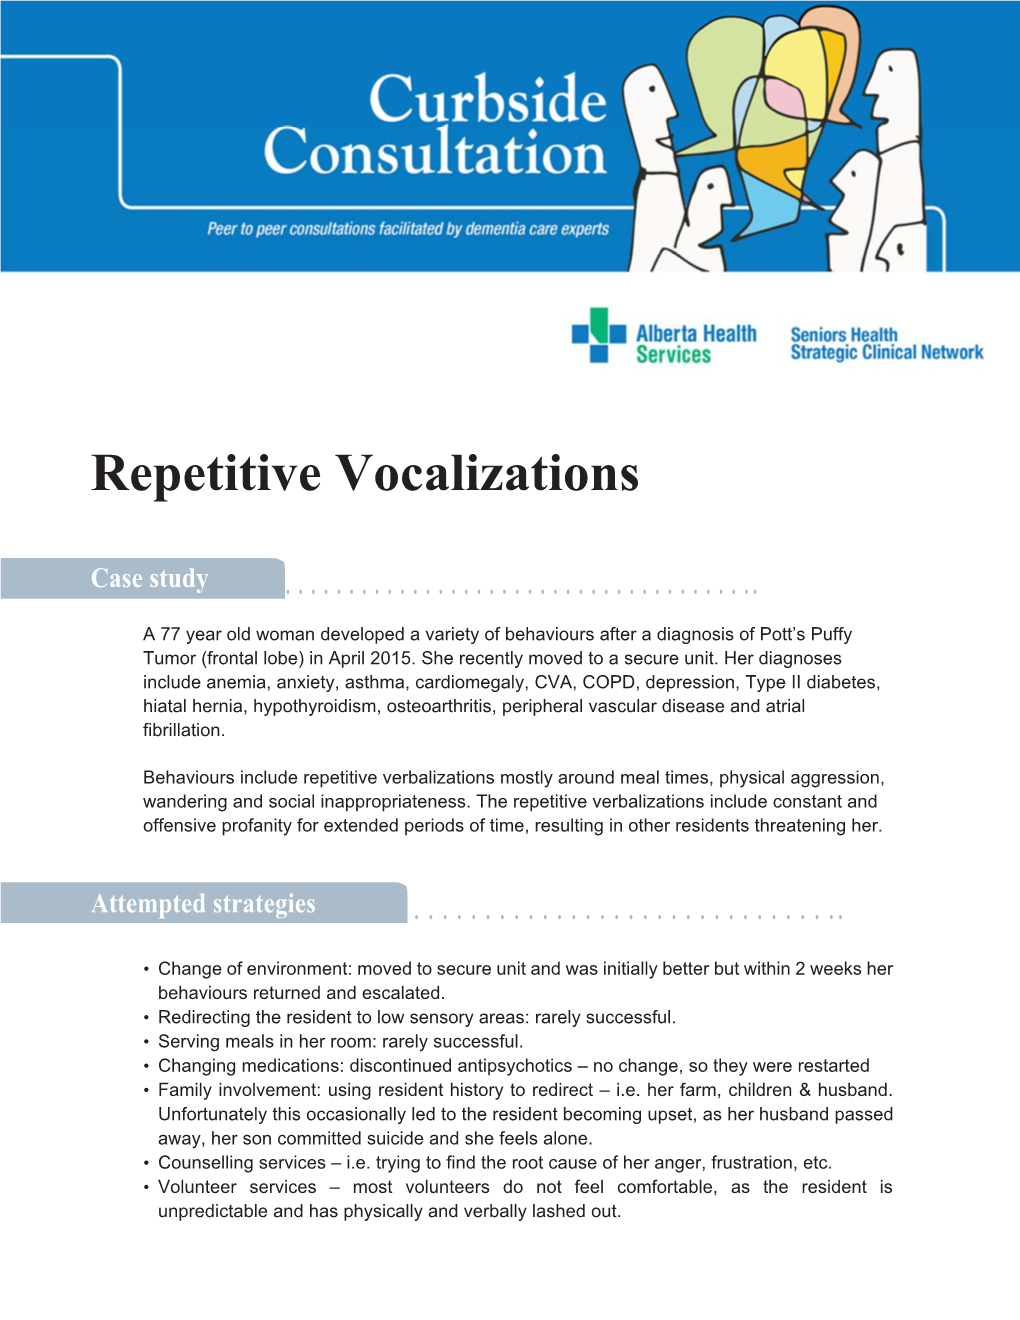 Repetitive Vocalizations